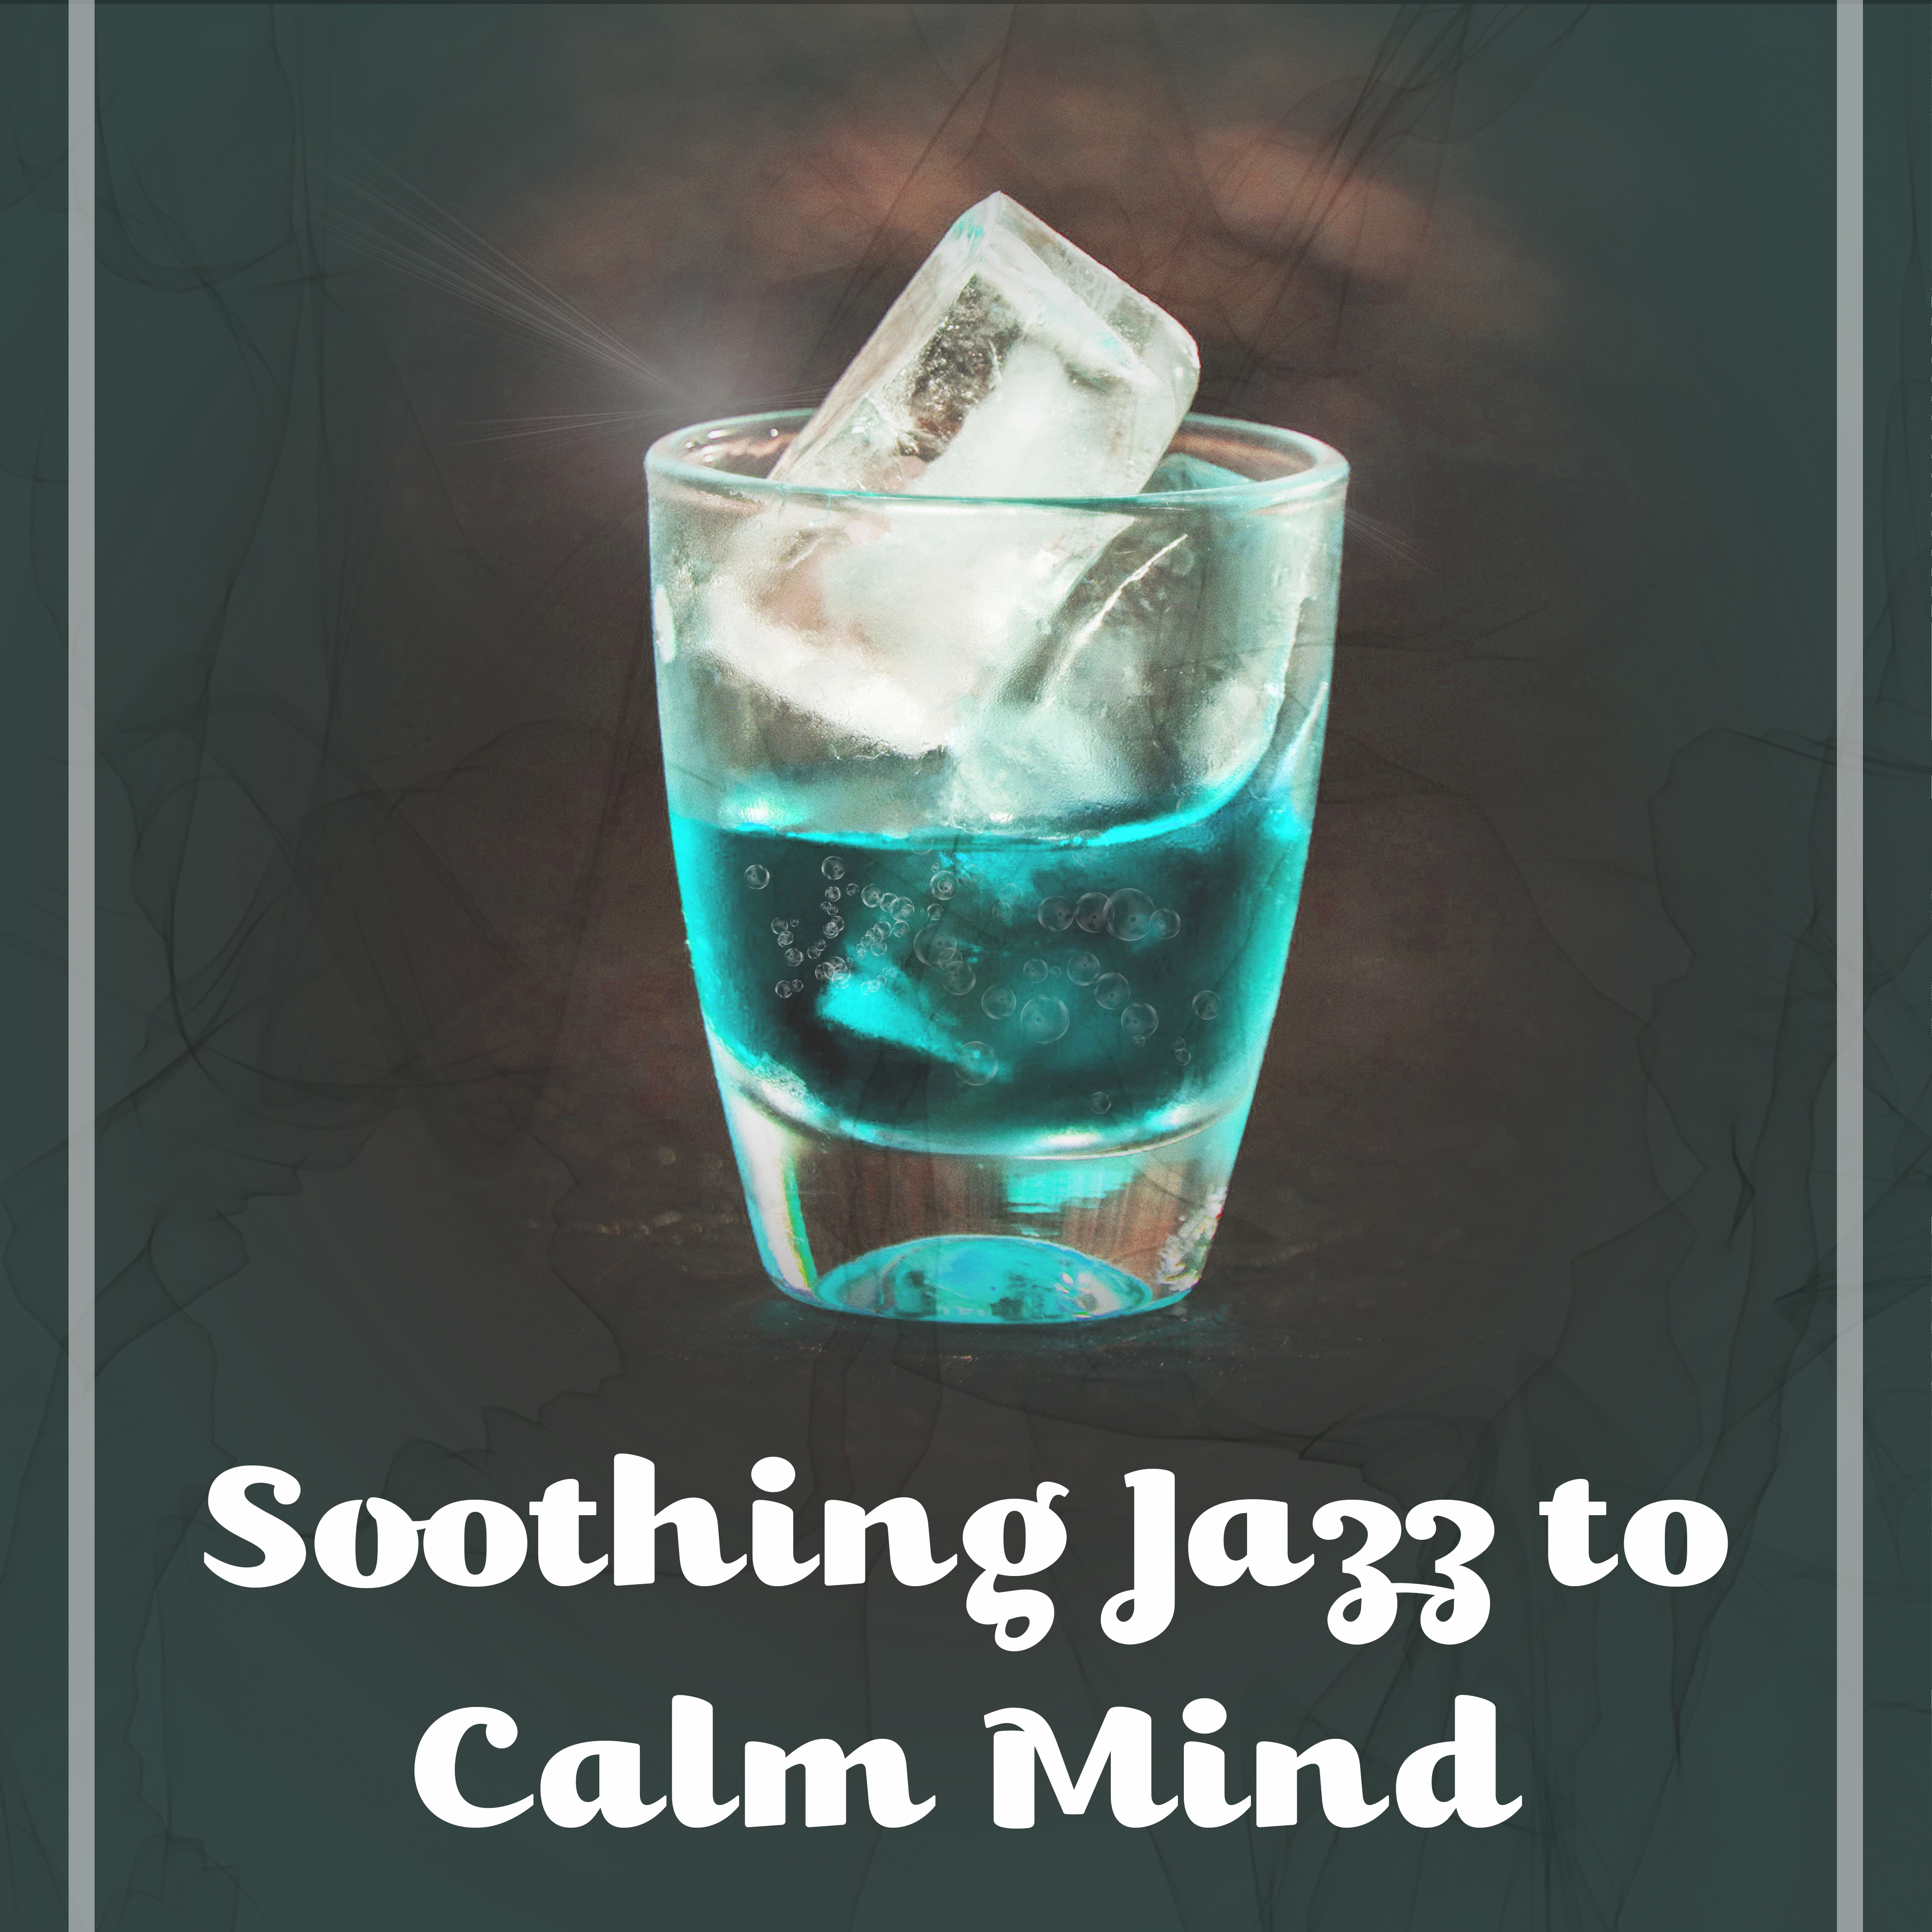 Soothing Jazz to Calm Mind  Relaxing Piano Bar, Instrumental Calm Jazz, Peaceful Music, Rest with Smooth Sounds